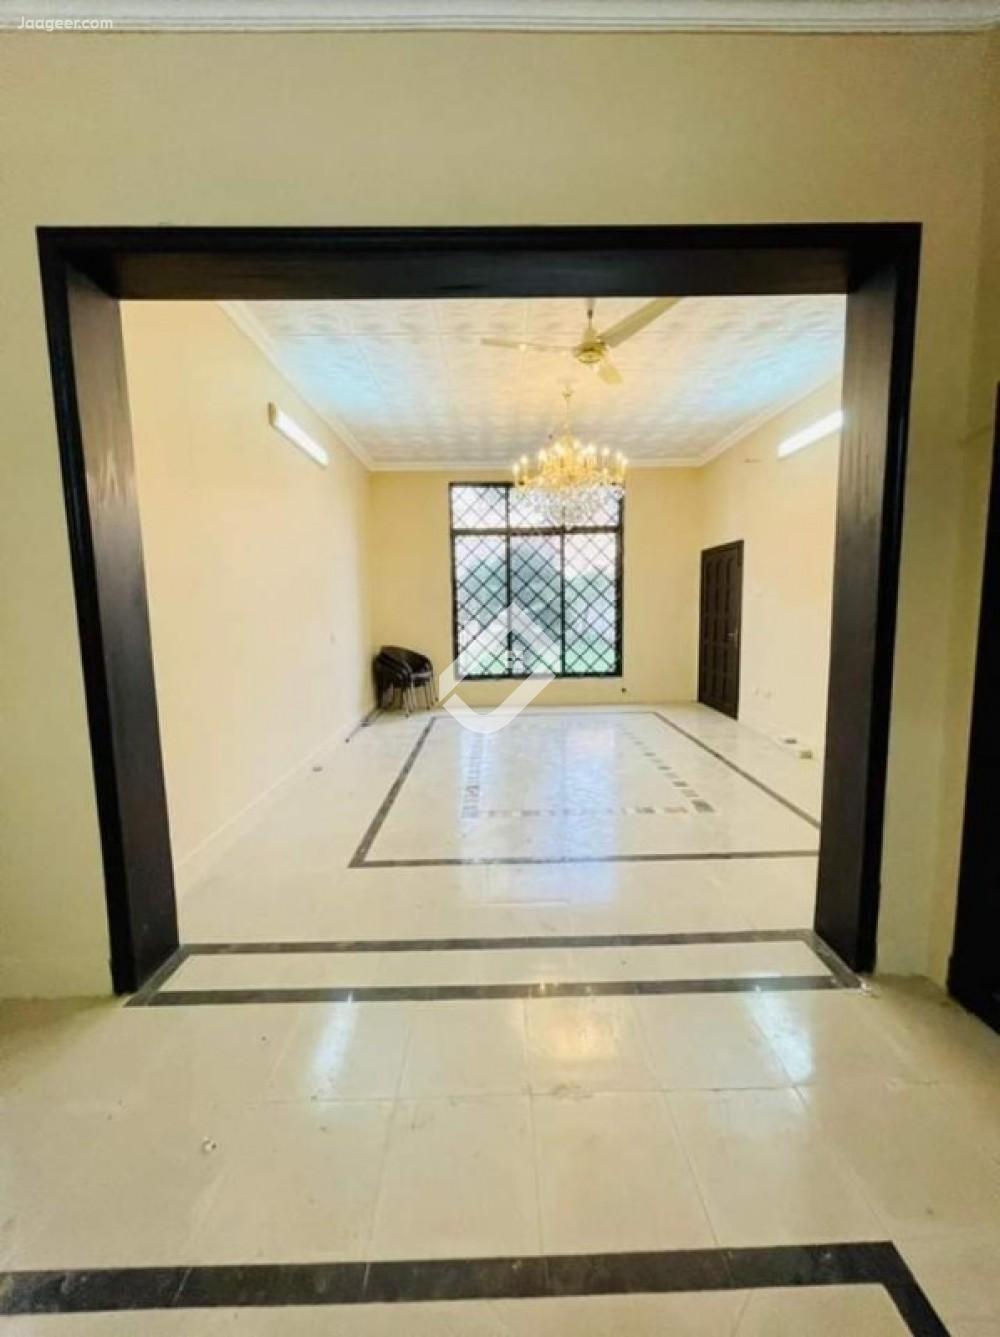 Main image 1 Kanal Double Storey House For Sale In Shalimar Colony  Shalimar Colony, Multan